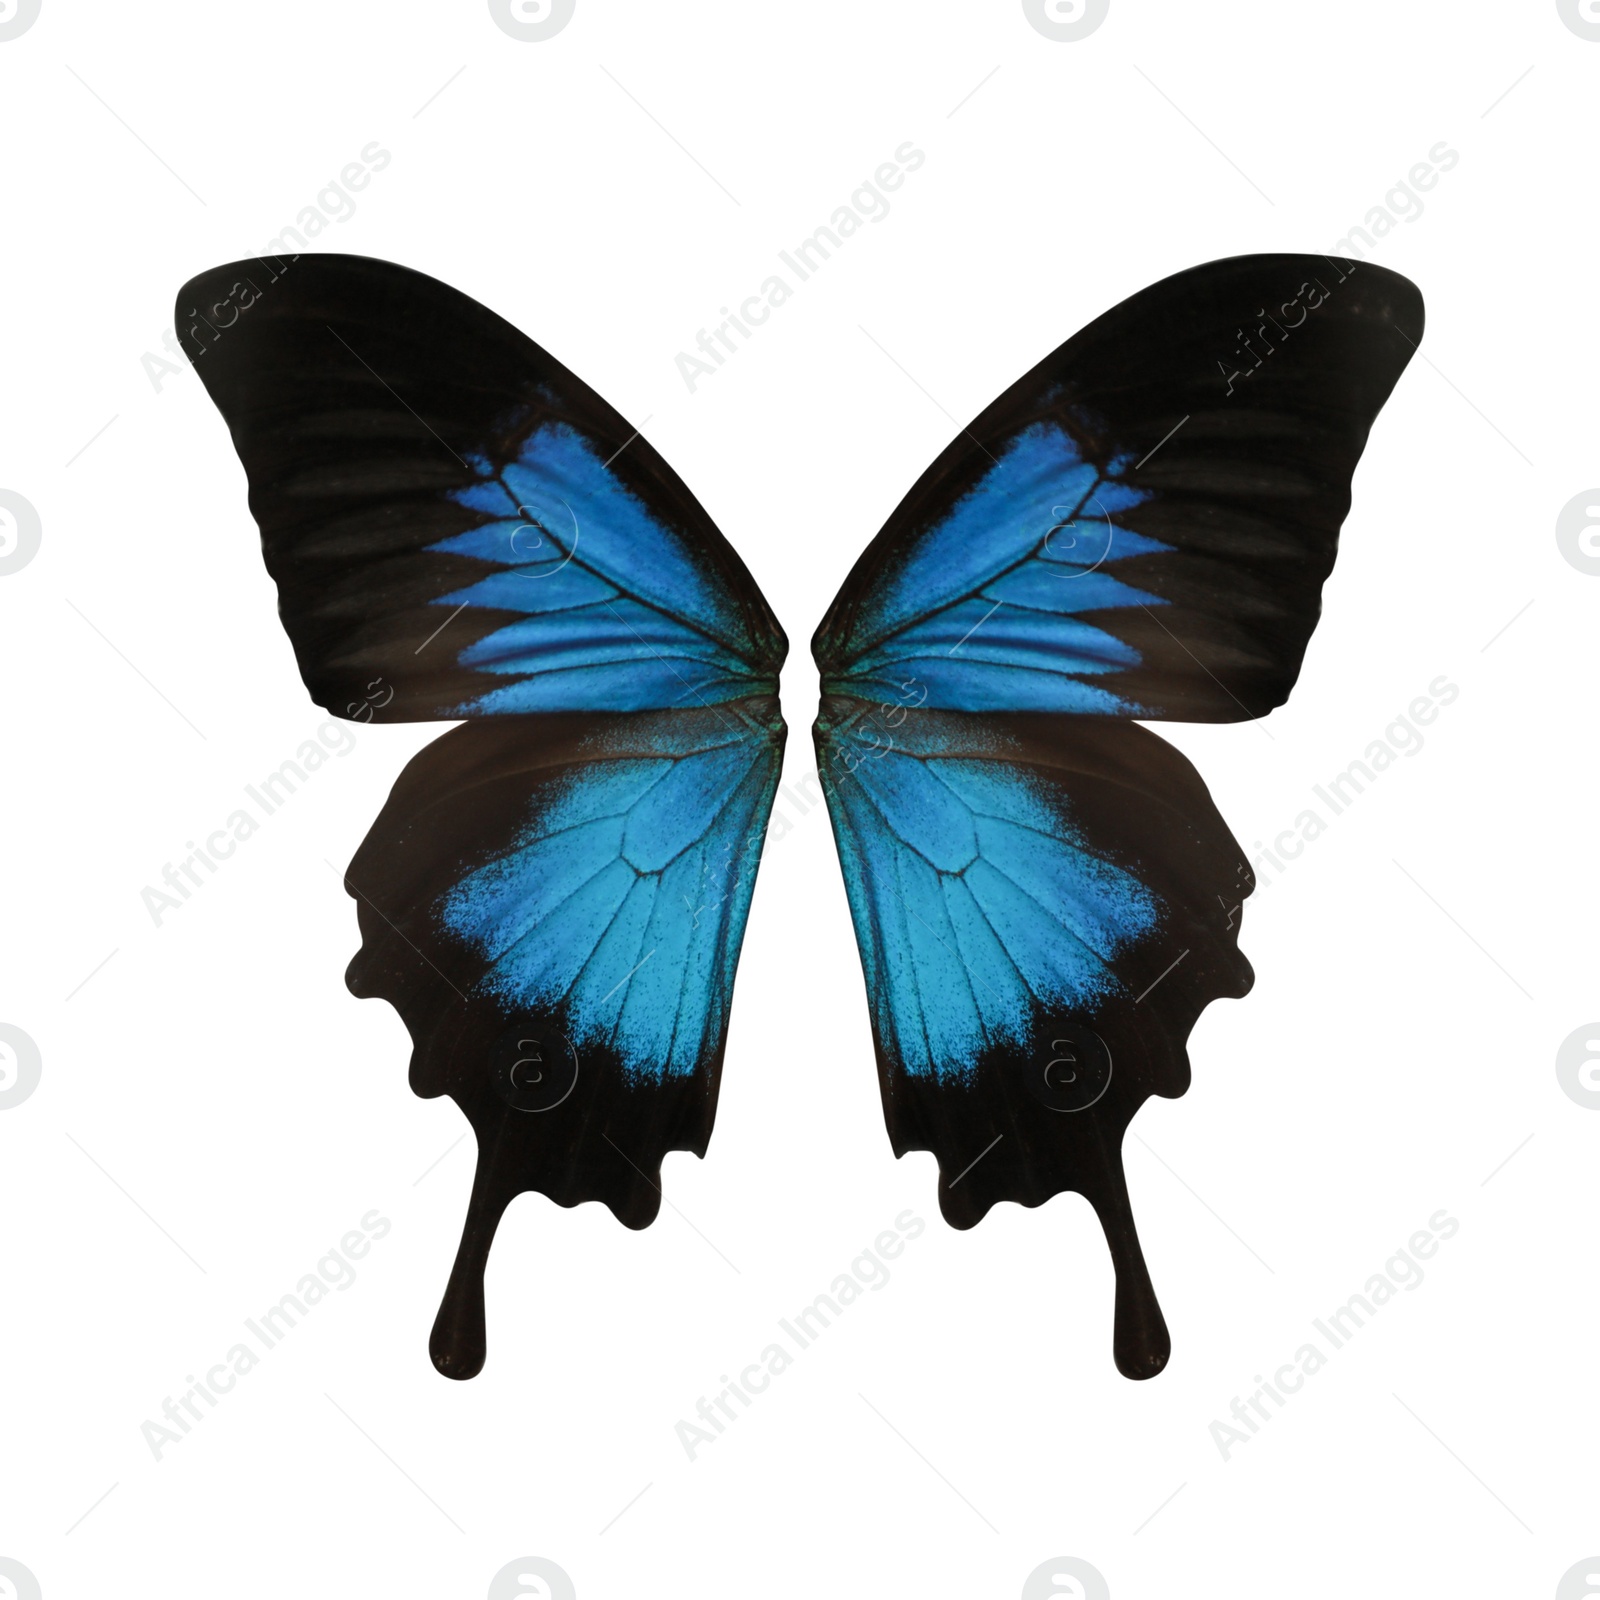 Image of Beautiful Ulysses butterfly wings on white background